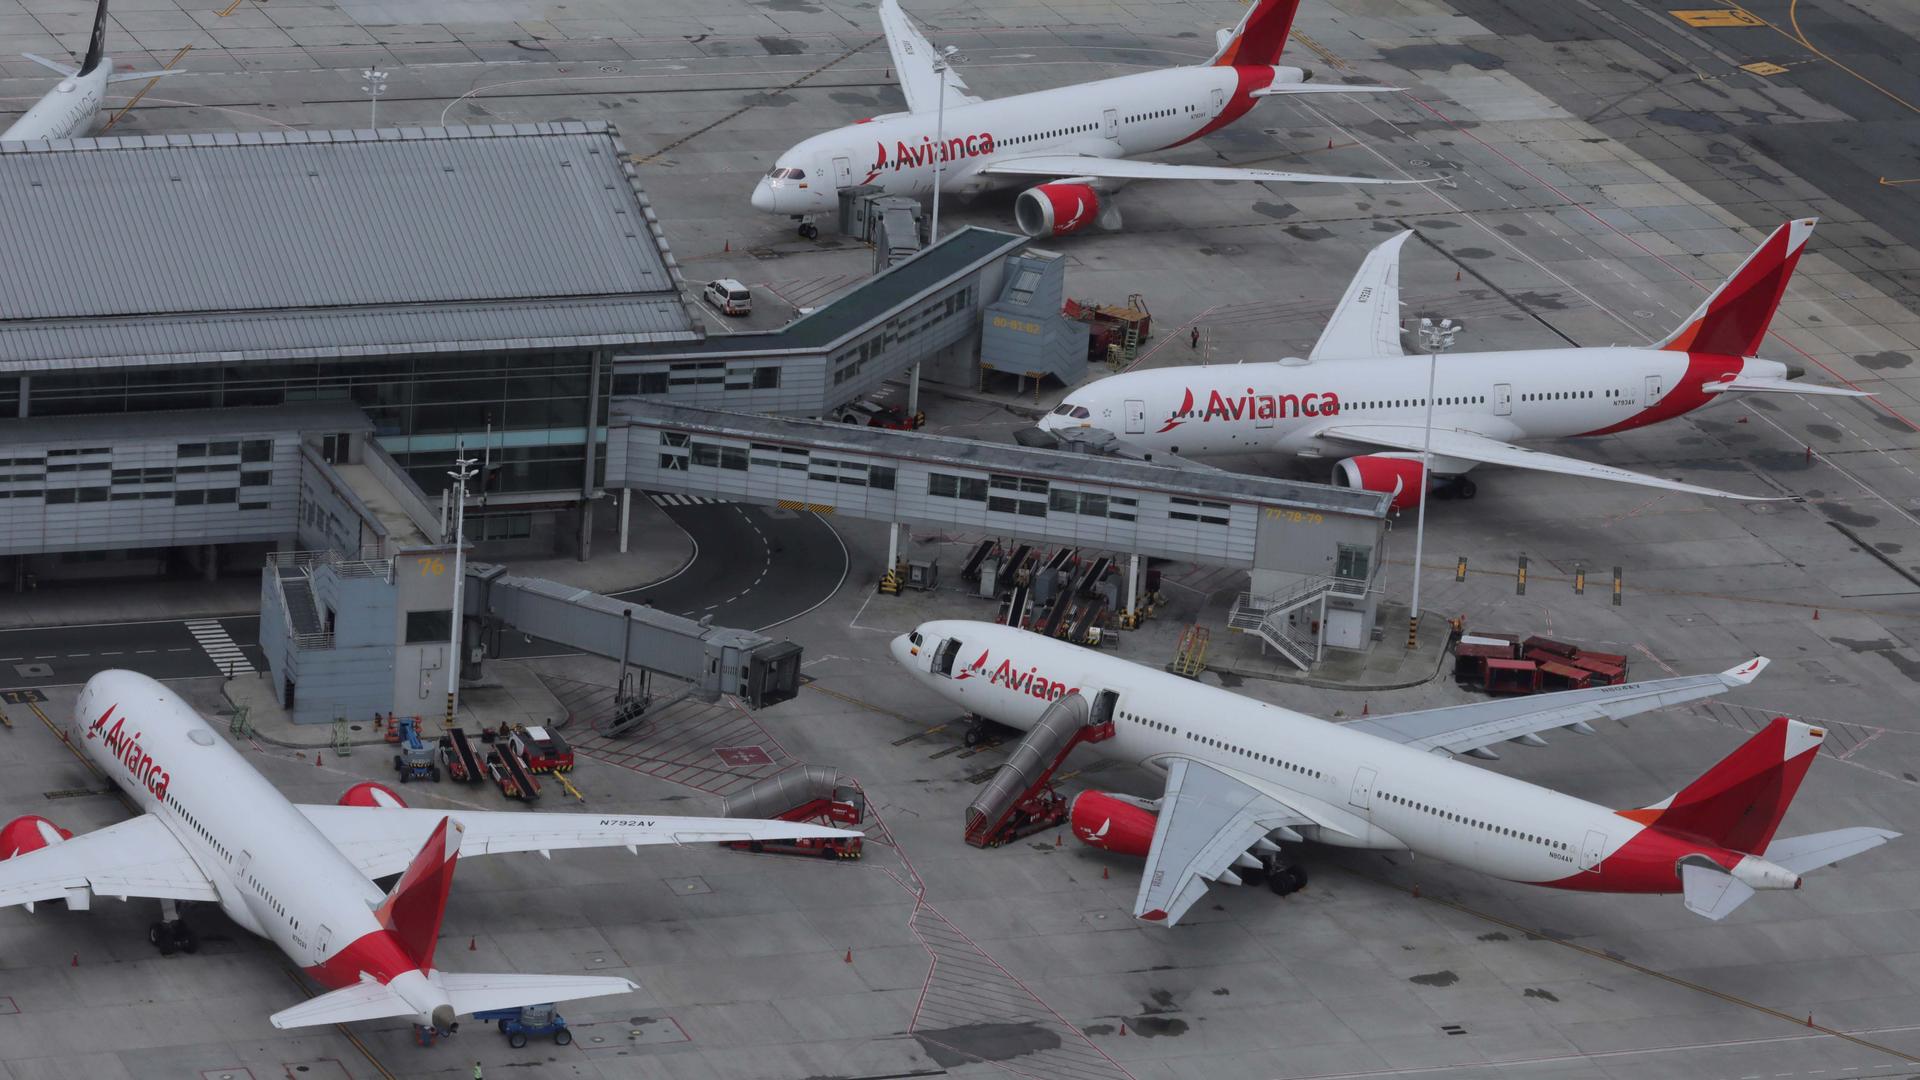 An aerial view shows Colombian airline Avianca's planes parked at El Dorado International Airport amid the coronavirus disease (COVID-19) outbreak in Bogota, Colombia, April 7, 2020.